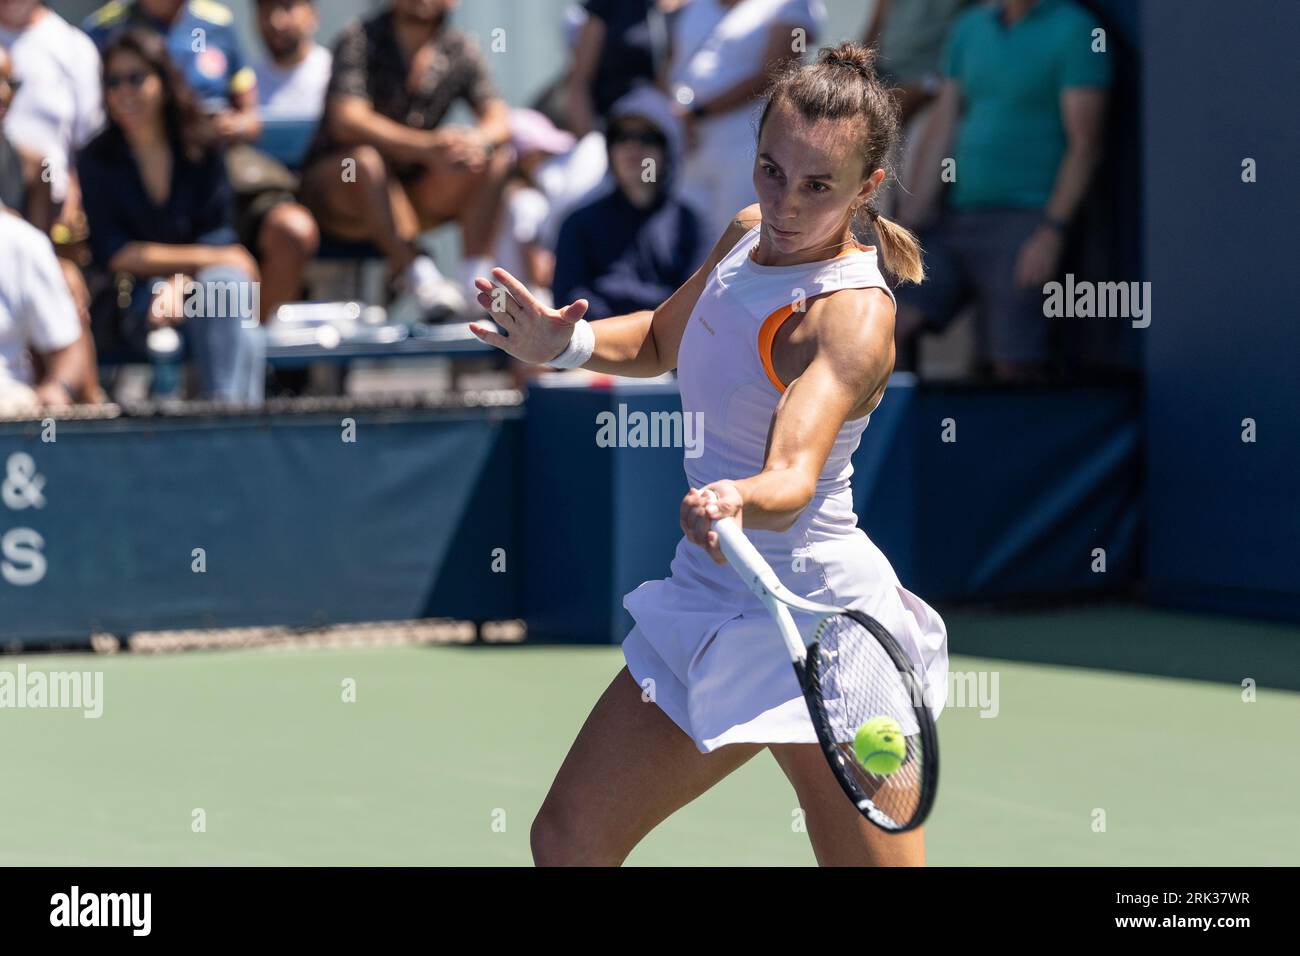 Ipek Oz of Turkiye returns ball during 1st round match against Emiliana Arango of Colombia of qualifying for US Open Championship at Billy Jean King Tennis Center in New York on August